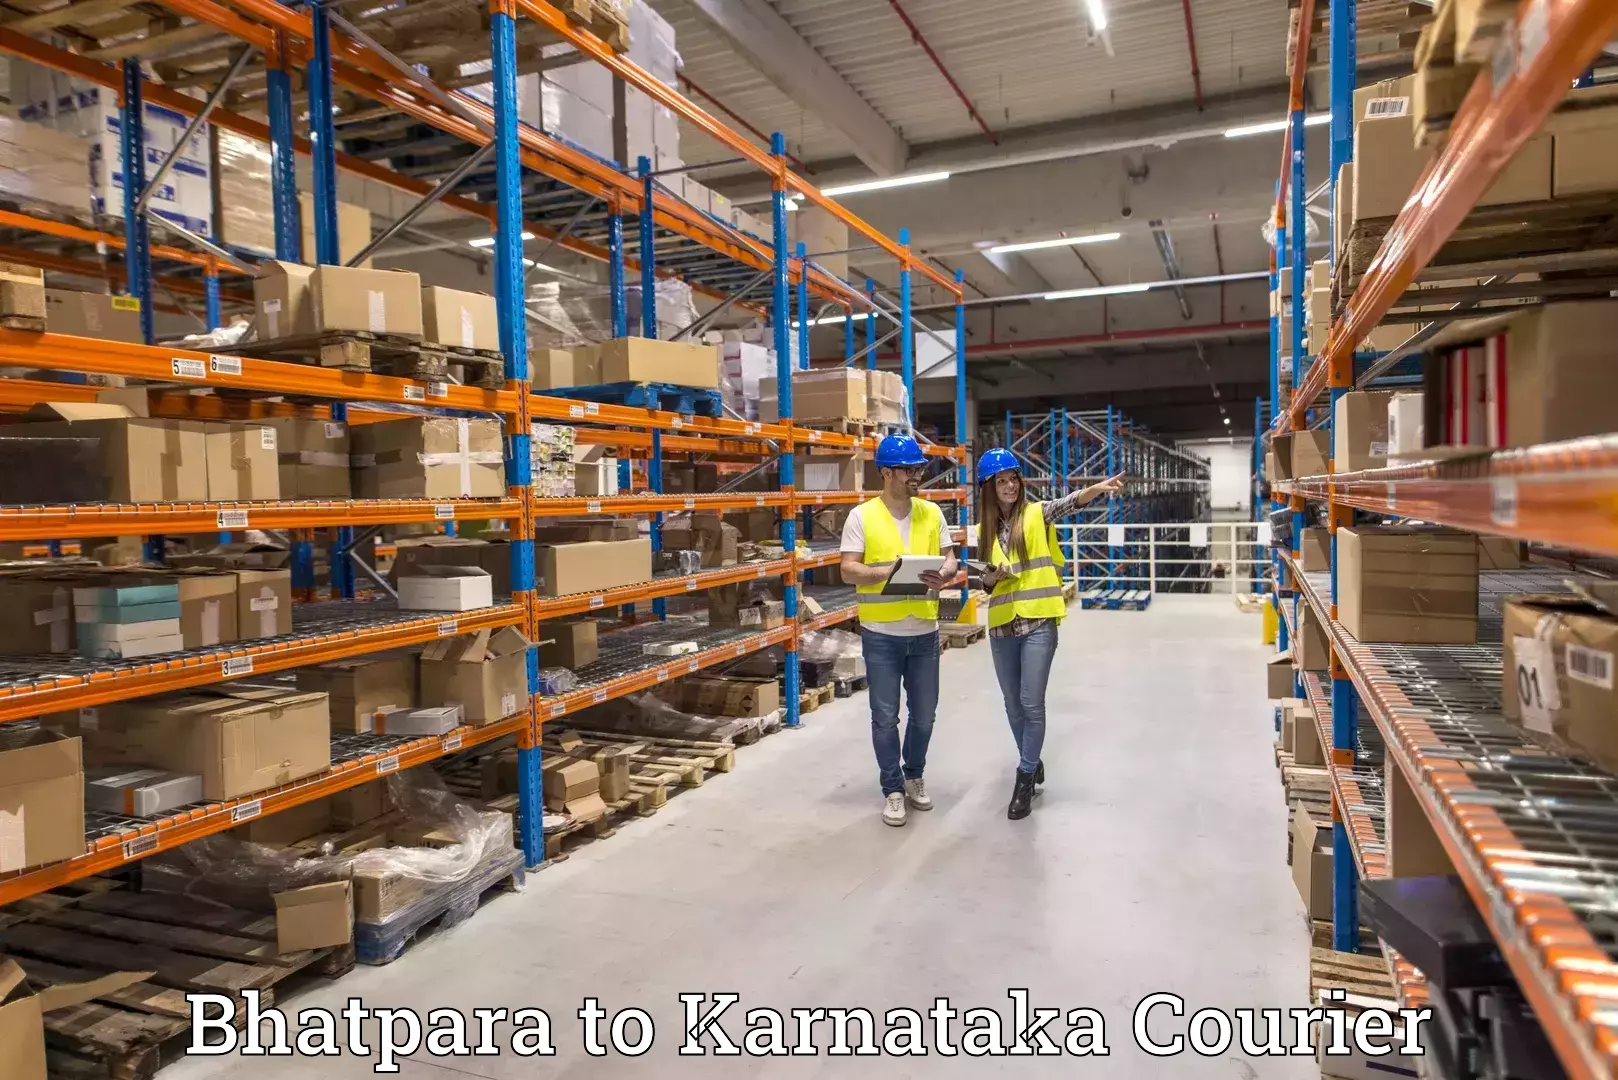 Express delivery capabilities Bhatpara to Siruguppa